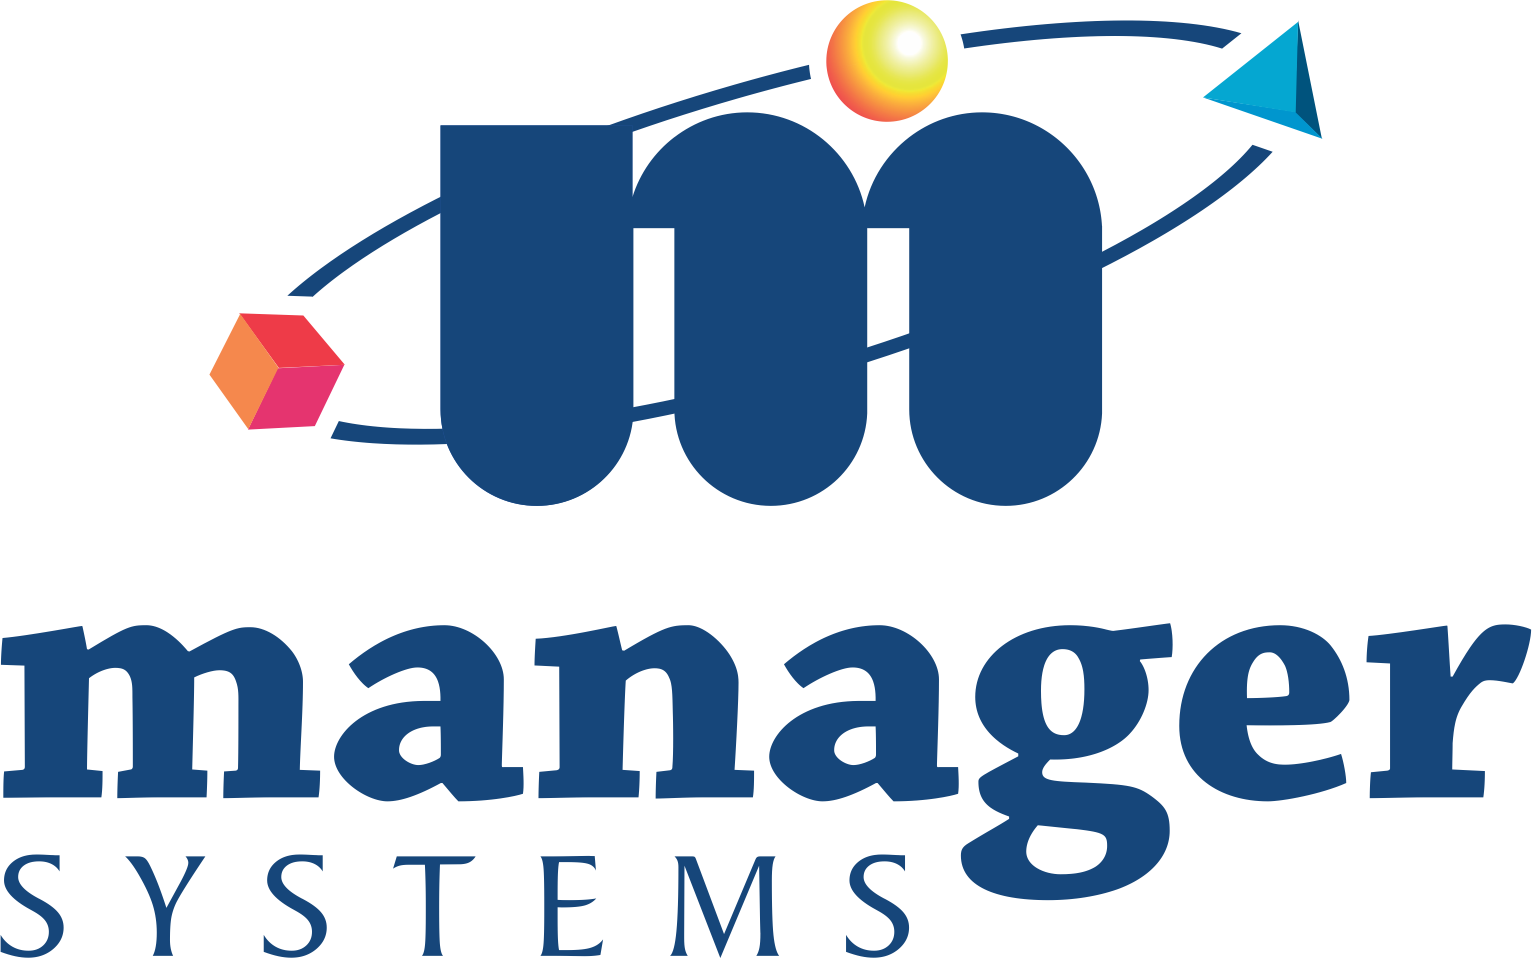 MANAGER SYSTEMS